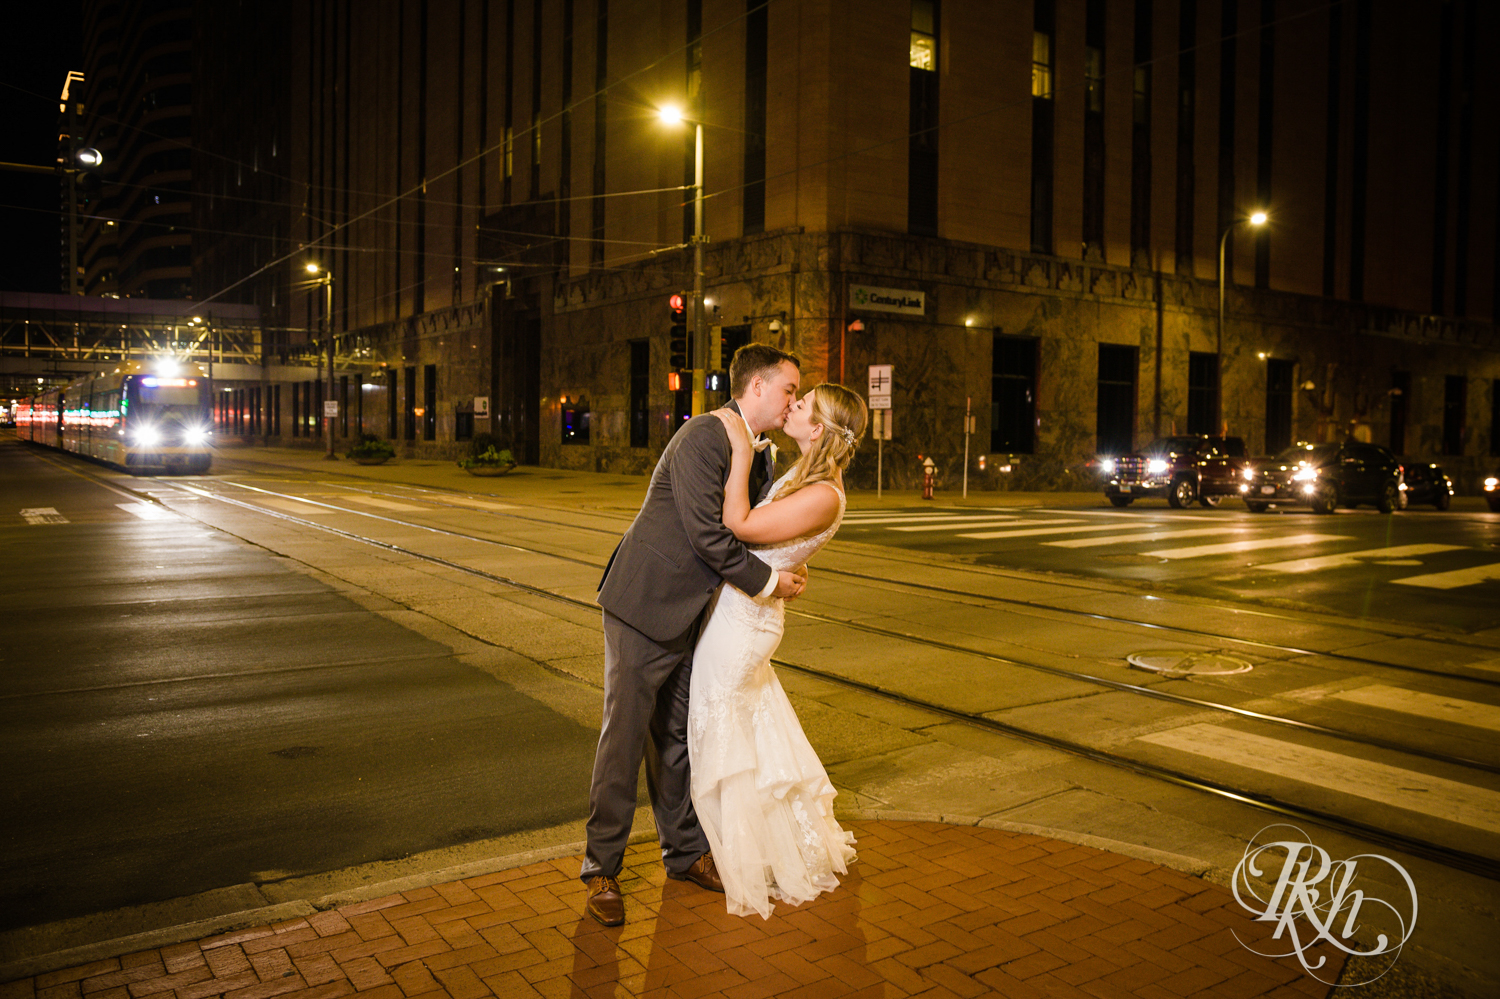 Bride and groom kiss at night in front of the Light Rail in Minneapolis, Minnesota.